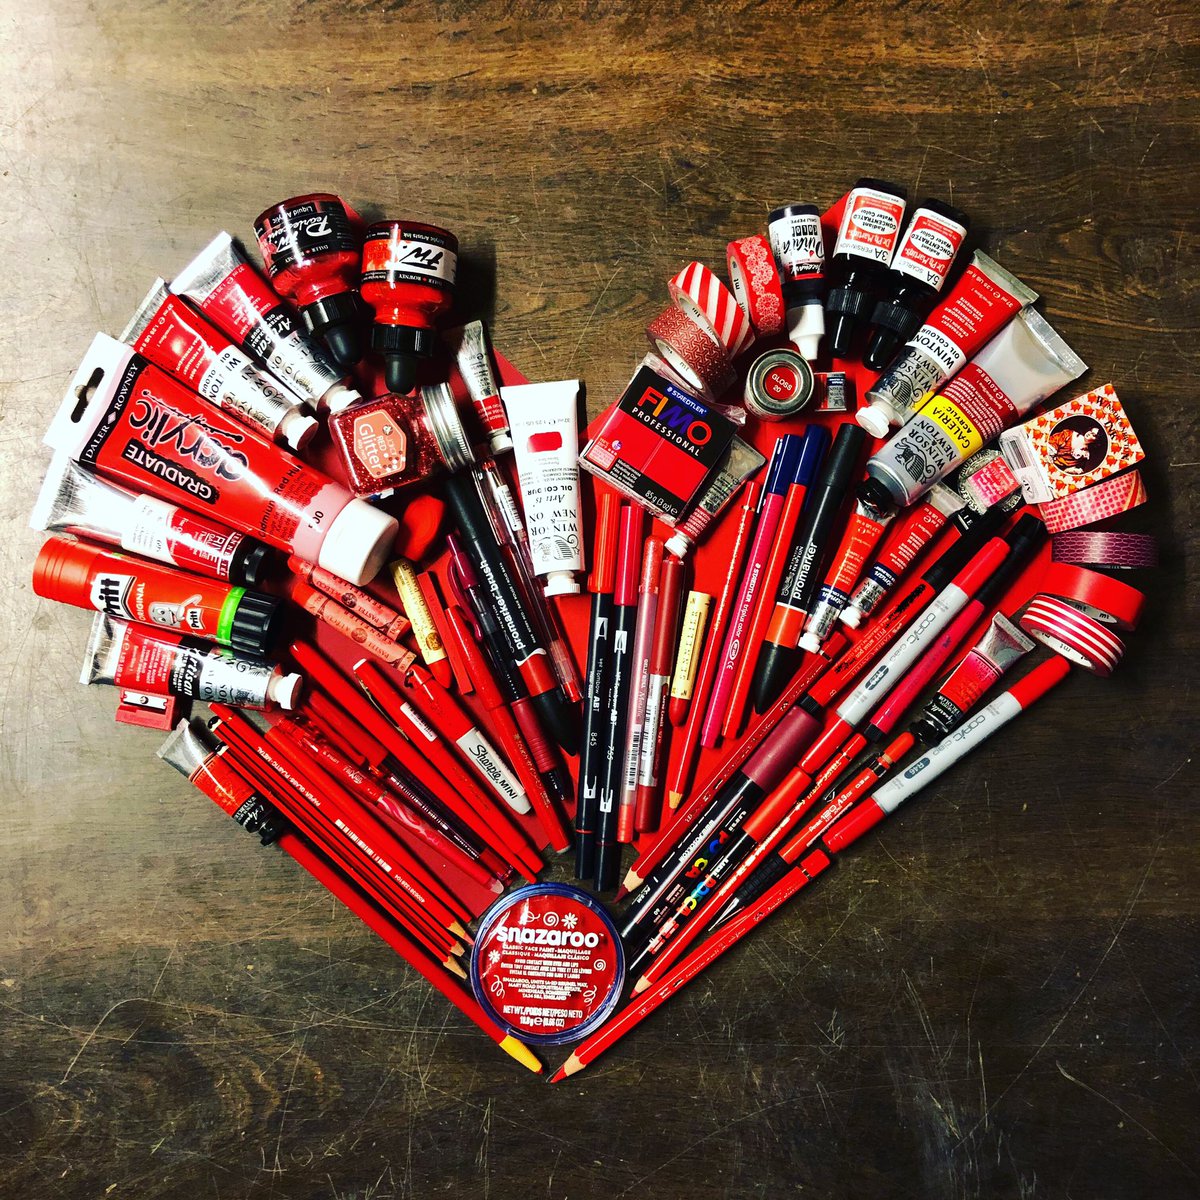 No heart is perfect but filling it with art supplies helps ❤️🦞🌡🖍📌#stationeryaddict #arttherapy #edinburghartshop #opensevendays #wonkyheart #candystore #artisttools